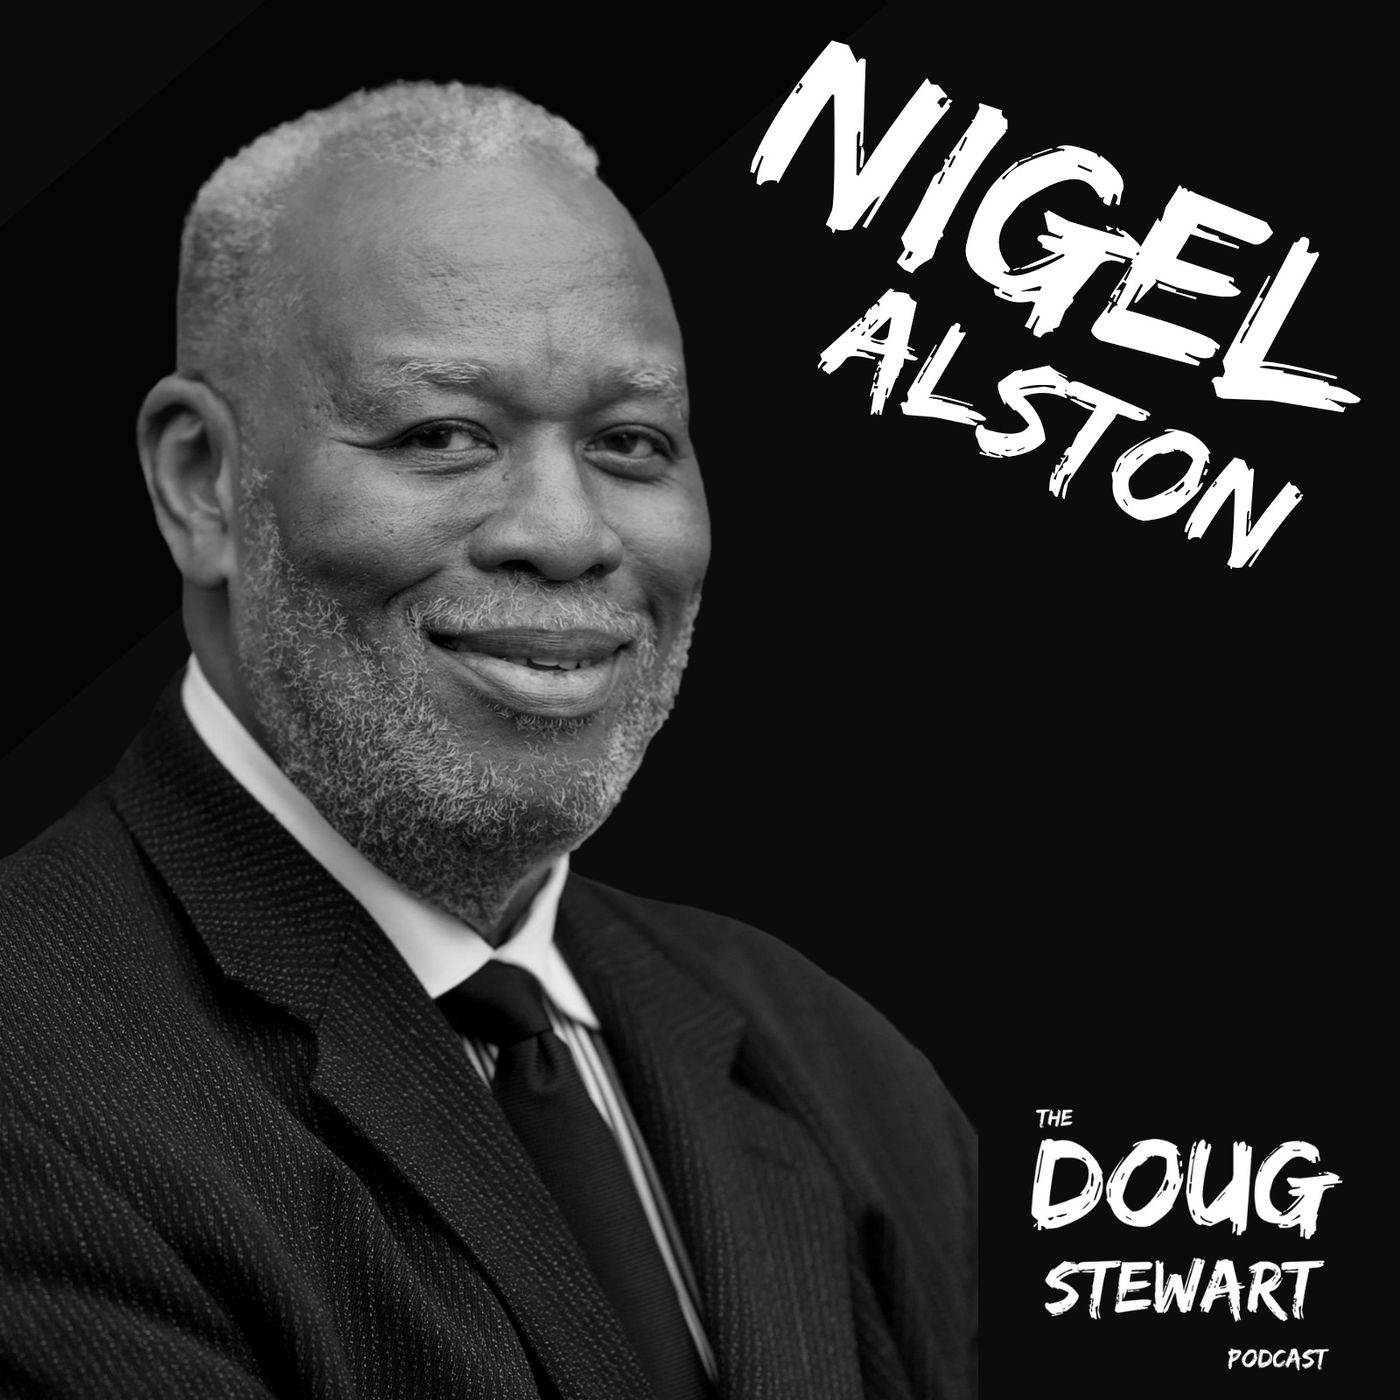 Session 4: Nigel Alston - How To Be An Advocate